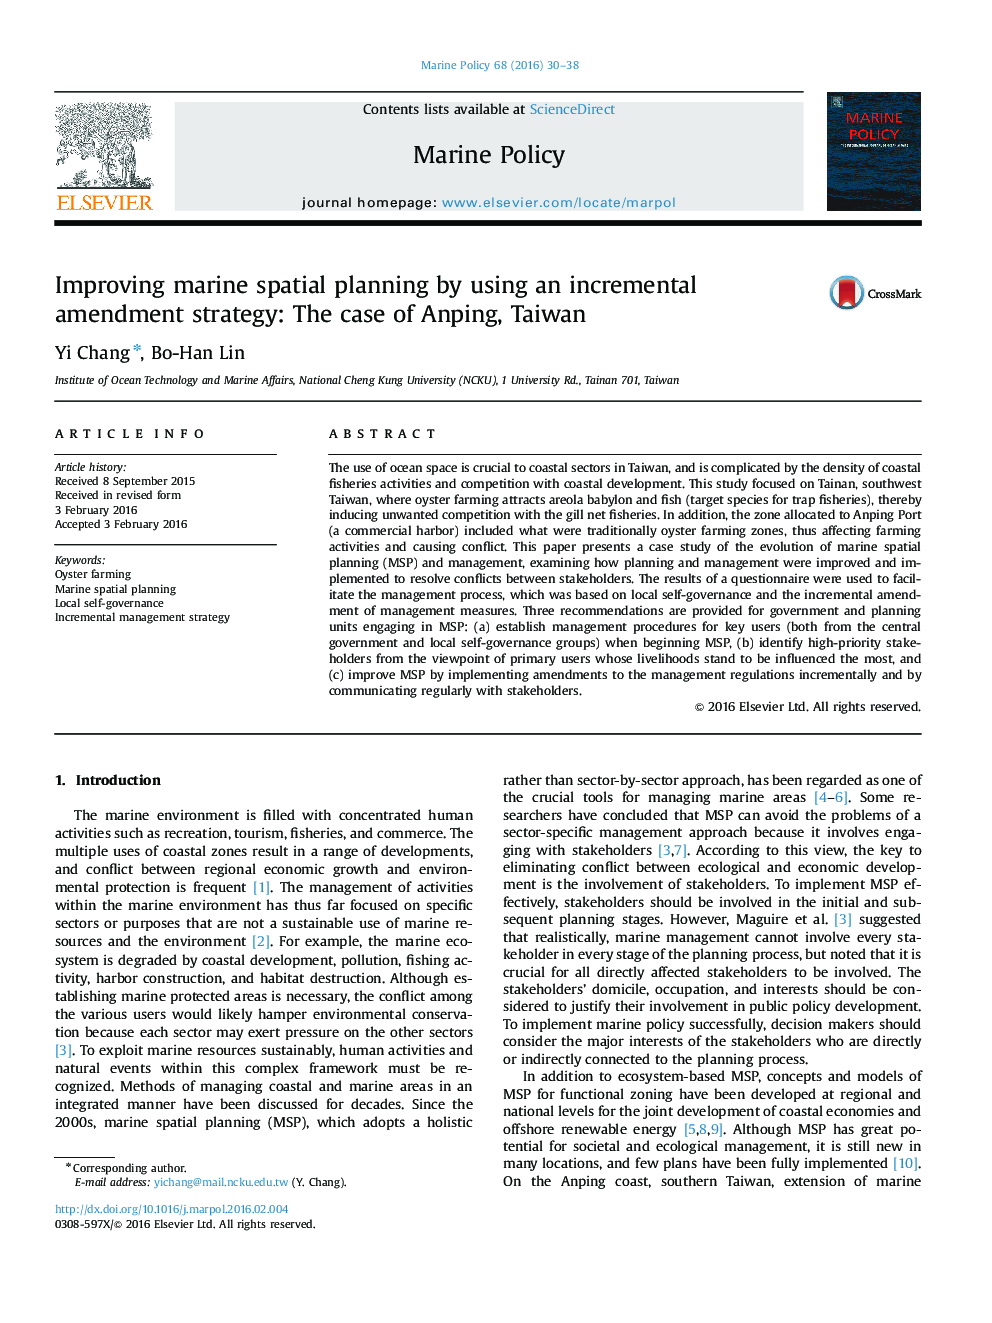 Improving marine spatial planning by using an incremental amendment strategy: The case of Anping, Taiwan